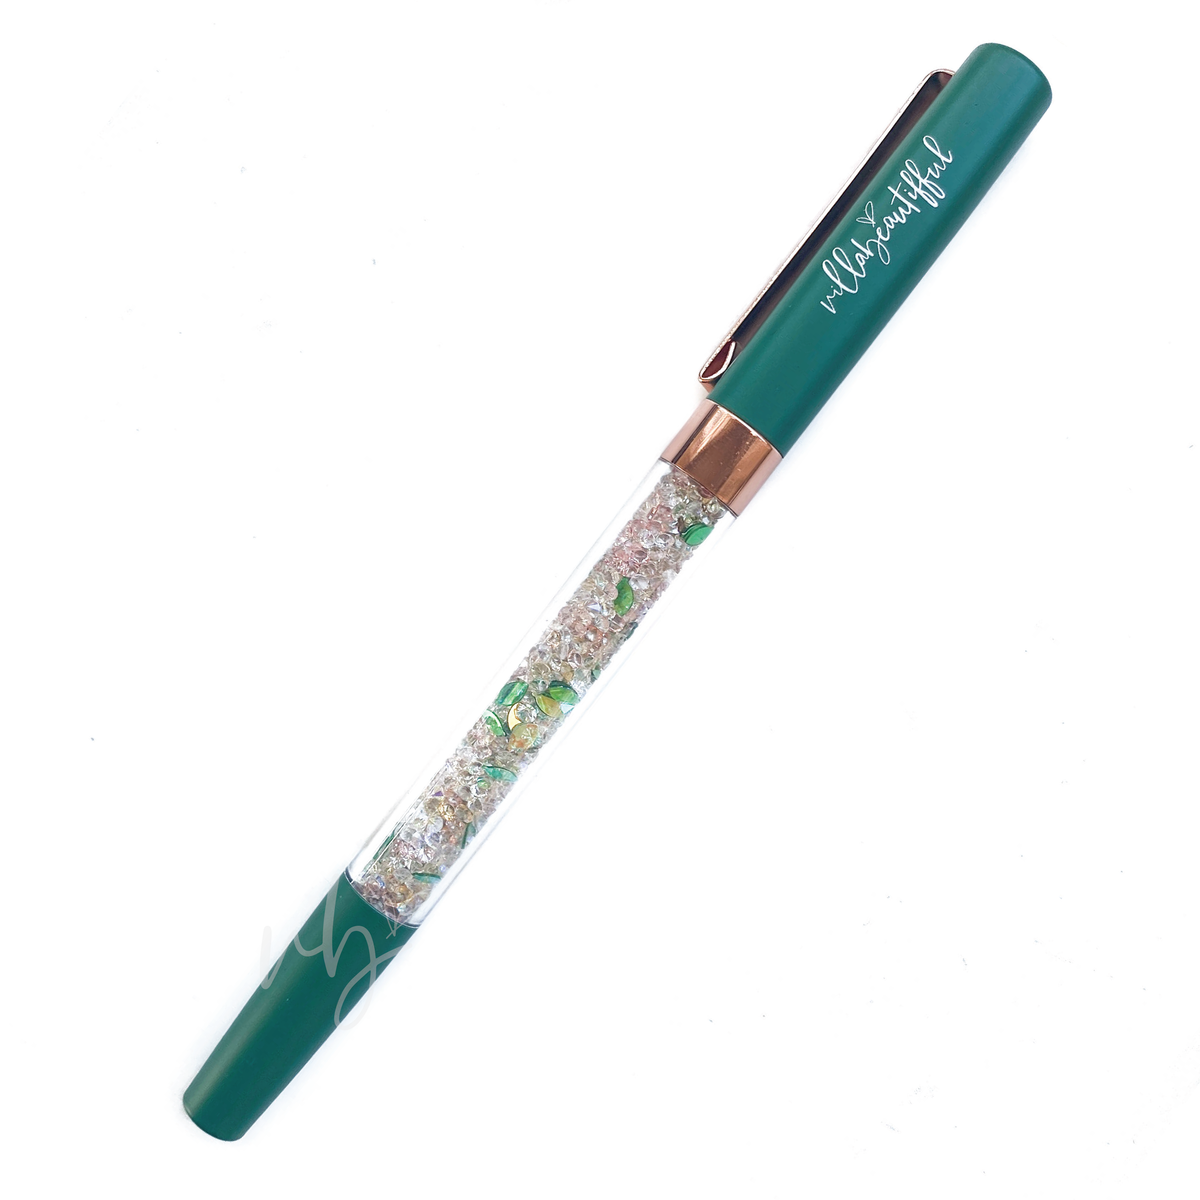 Plant Mama Imperfect Crystal VBPen | limited kit pen